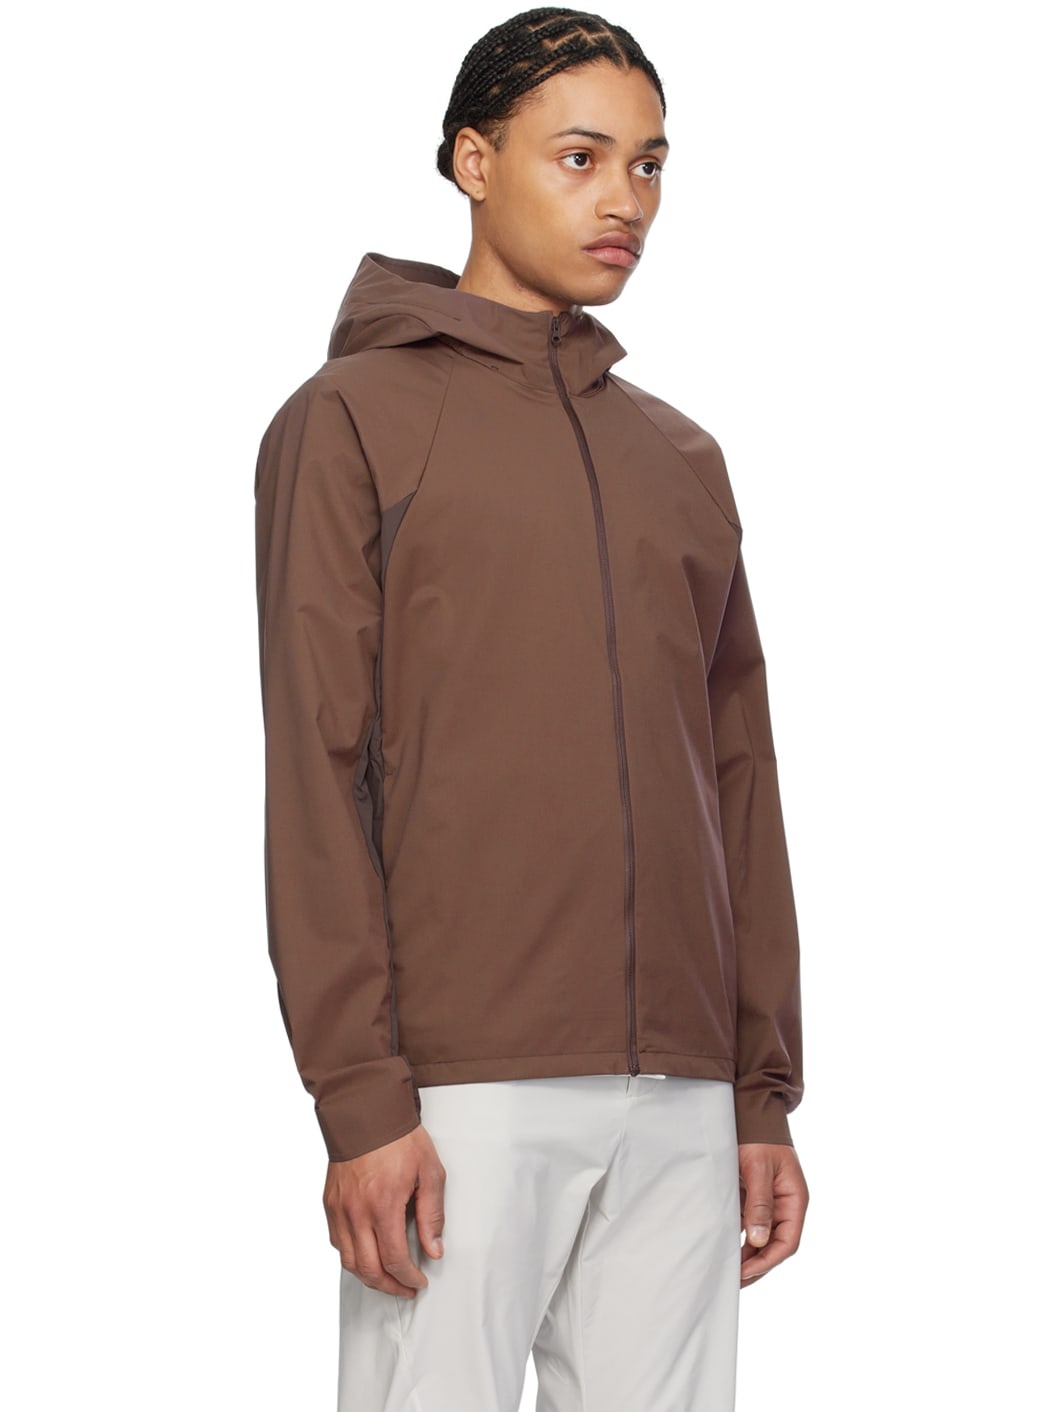 Brown 6.0 Right Technical Jacket - 2